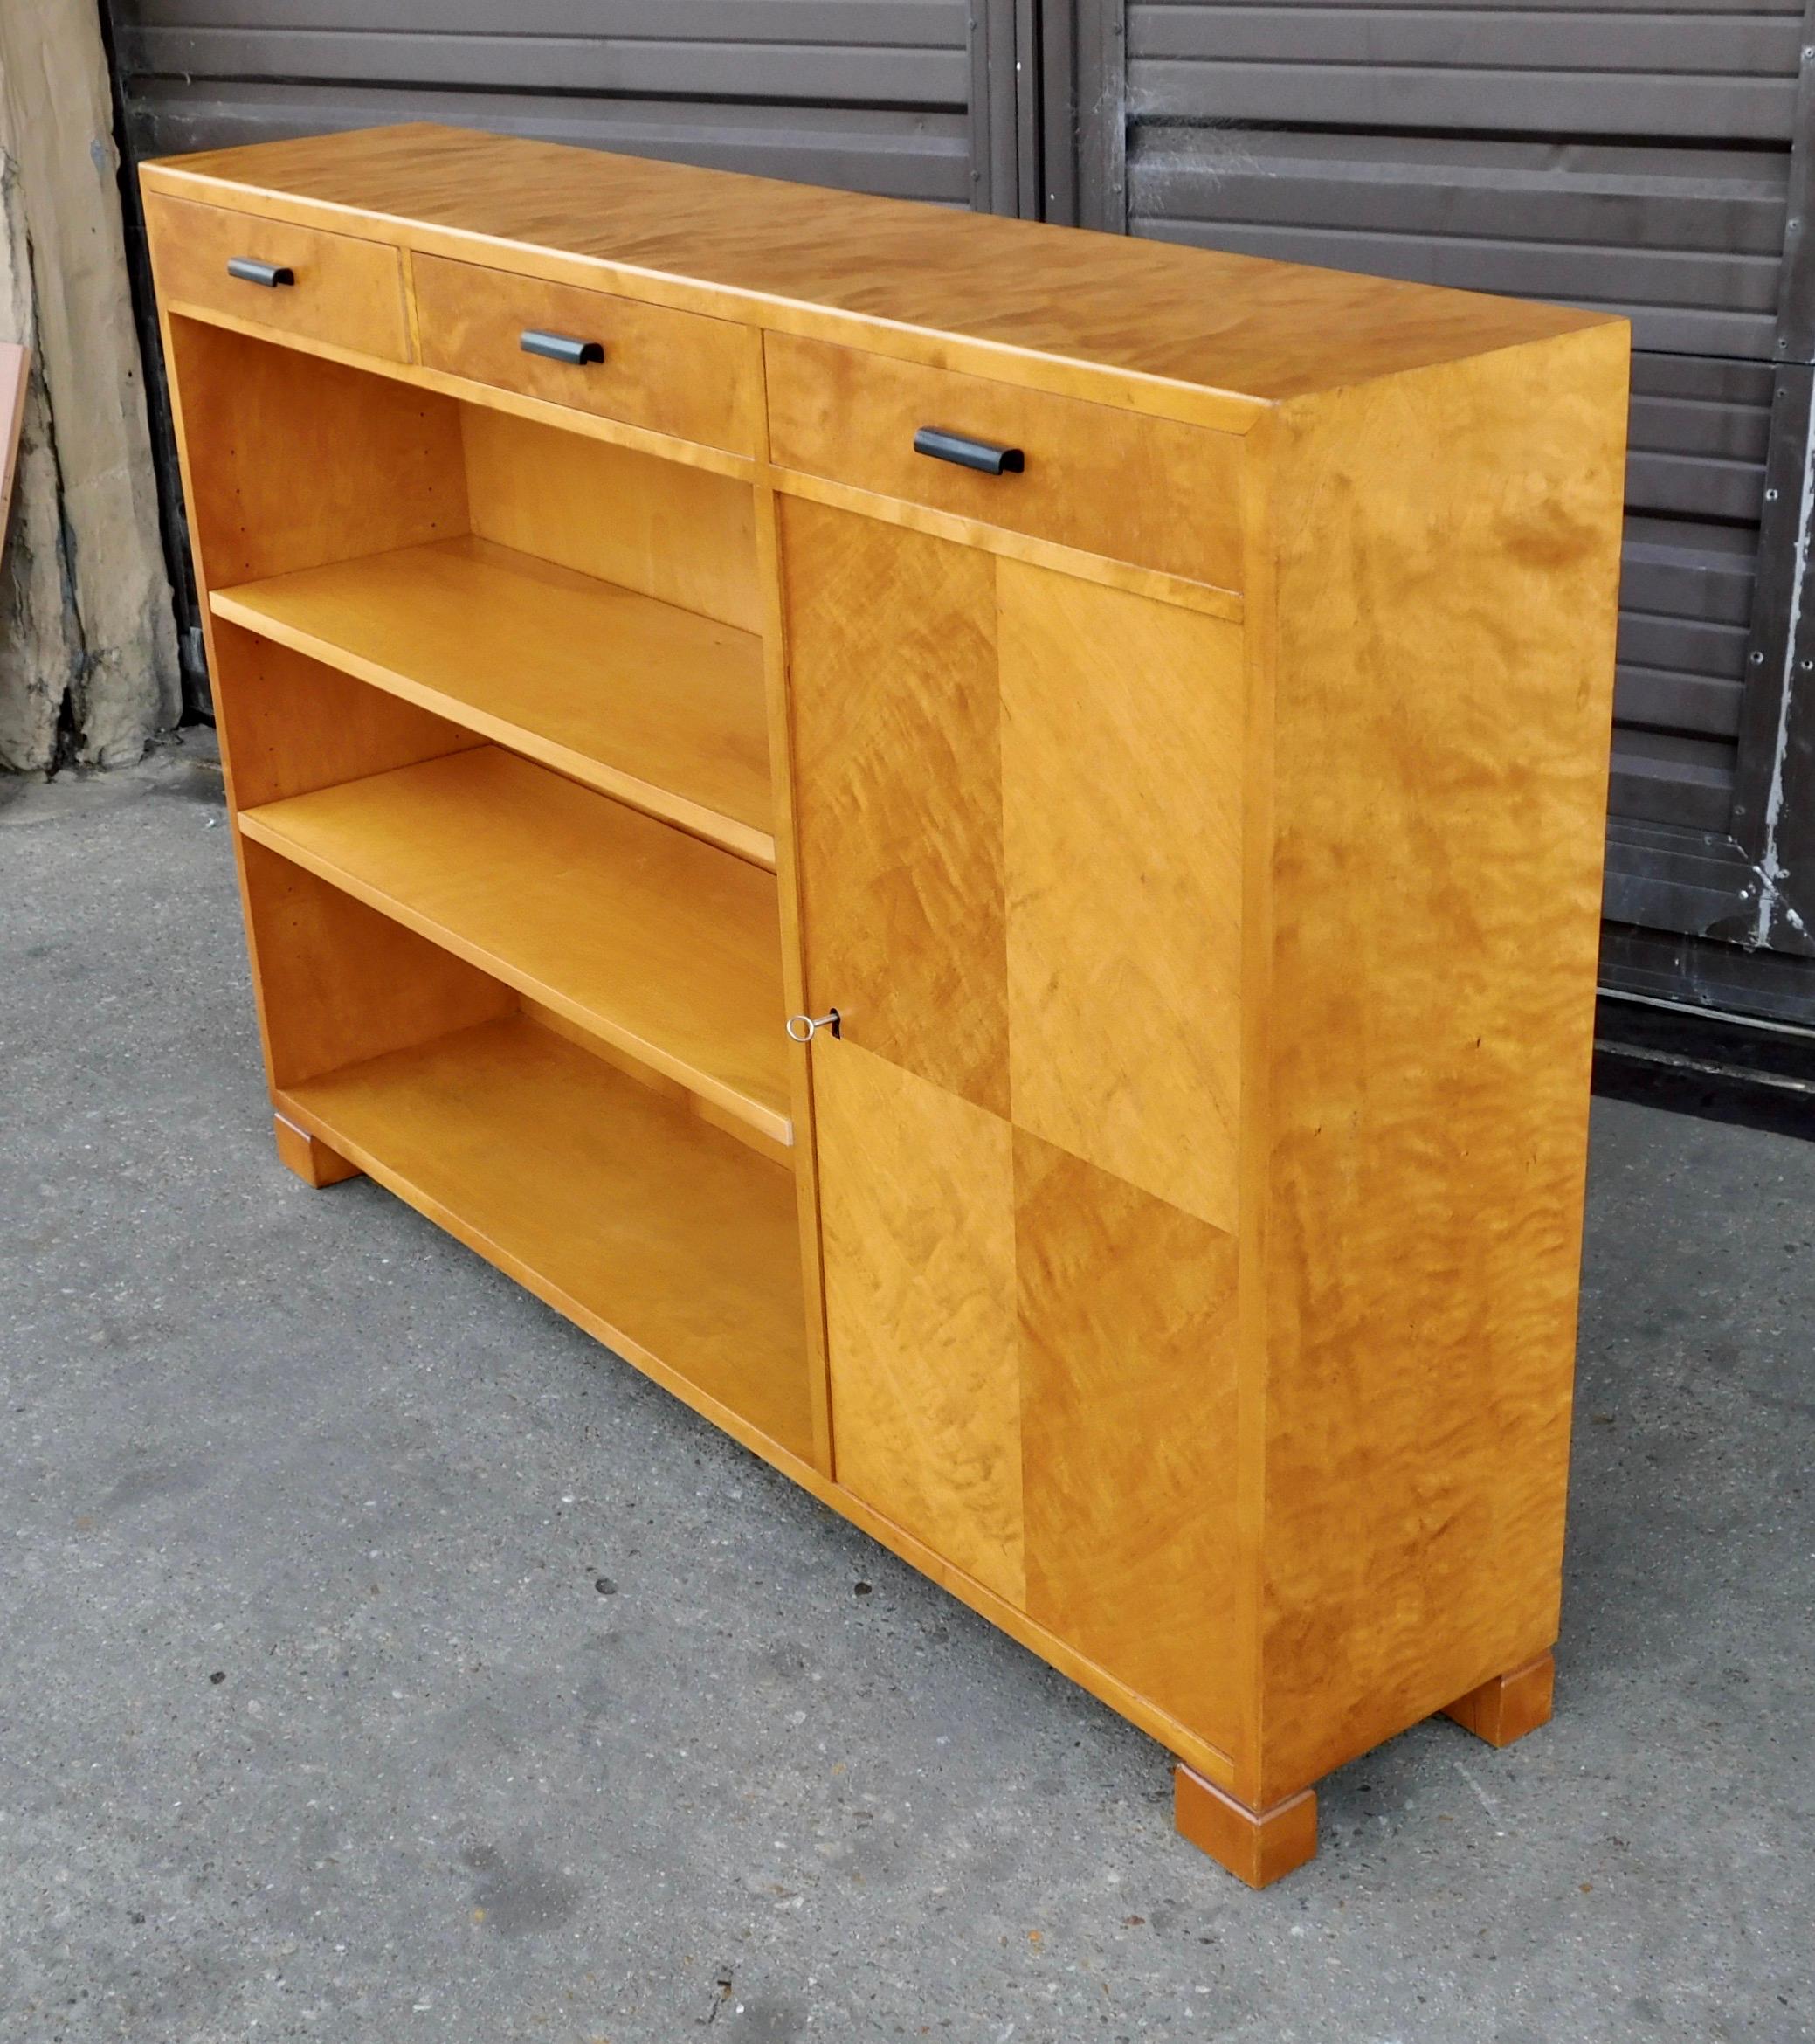 Swedish Art Deco era book cabinet with removable/adjustable shelves and enclosed cabinet.
Rendered in book-matched golden flame birch wood.
With ebonized birch wood pulls.
Slim profile at 10 inches-makes this a great case for tight spaces.
The